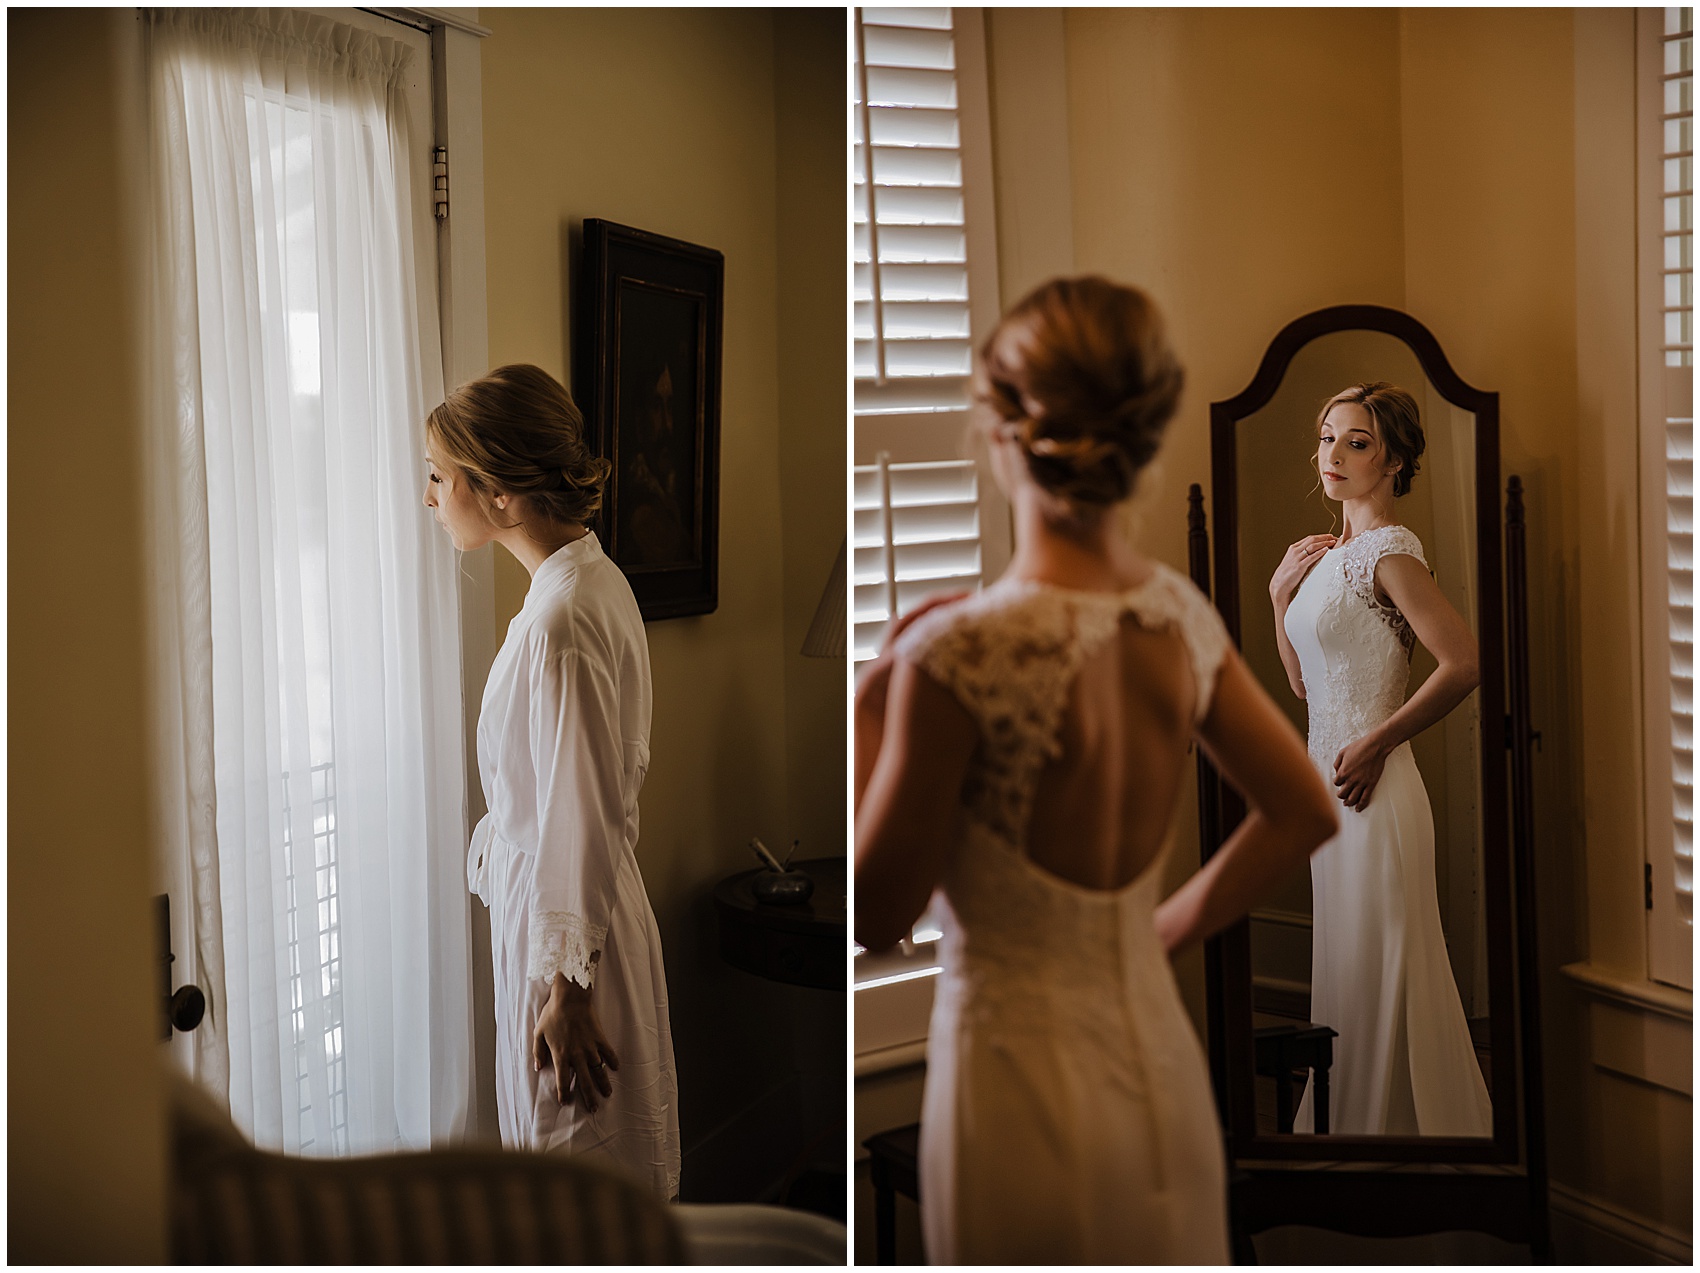 A bride gets ready in a mirror and looks out a mirror in the getting ready room